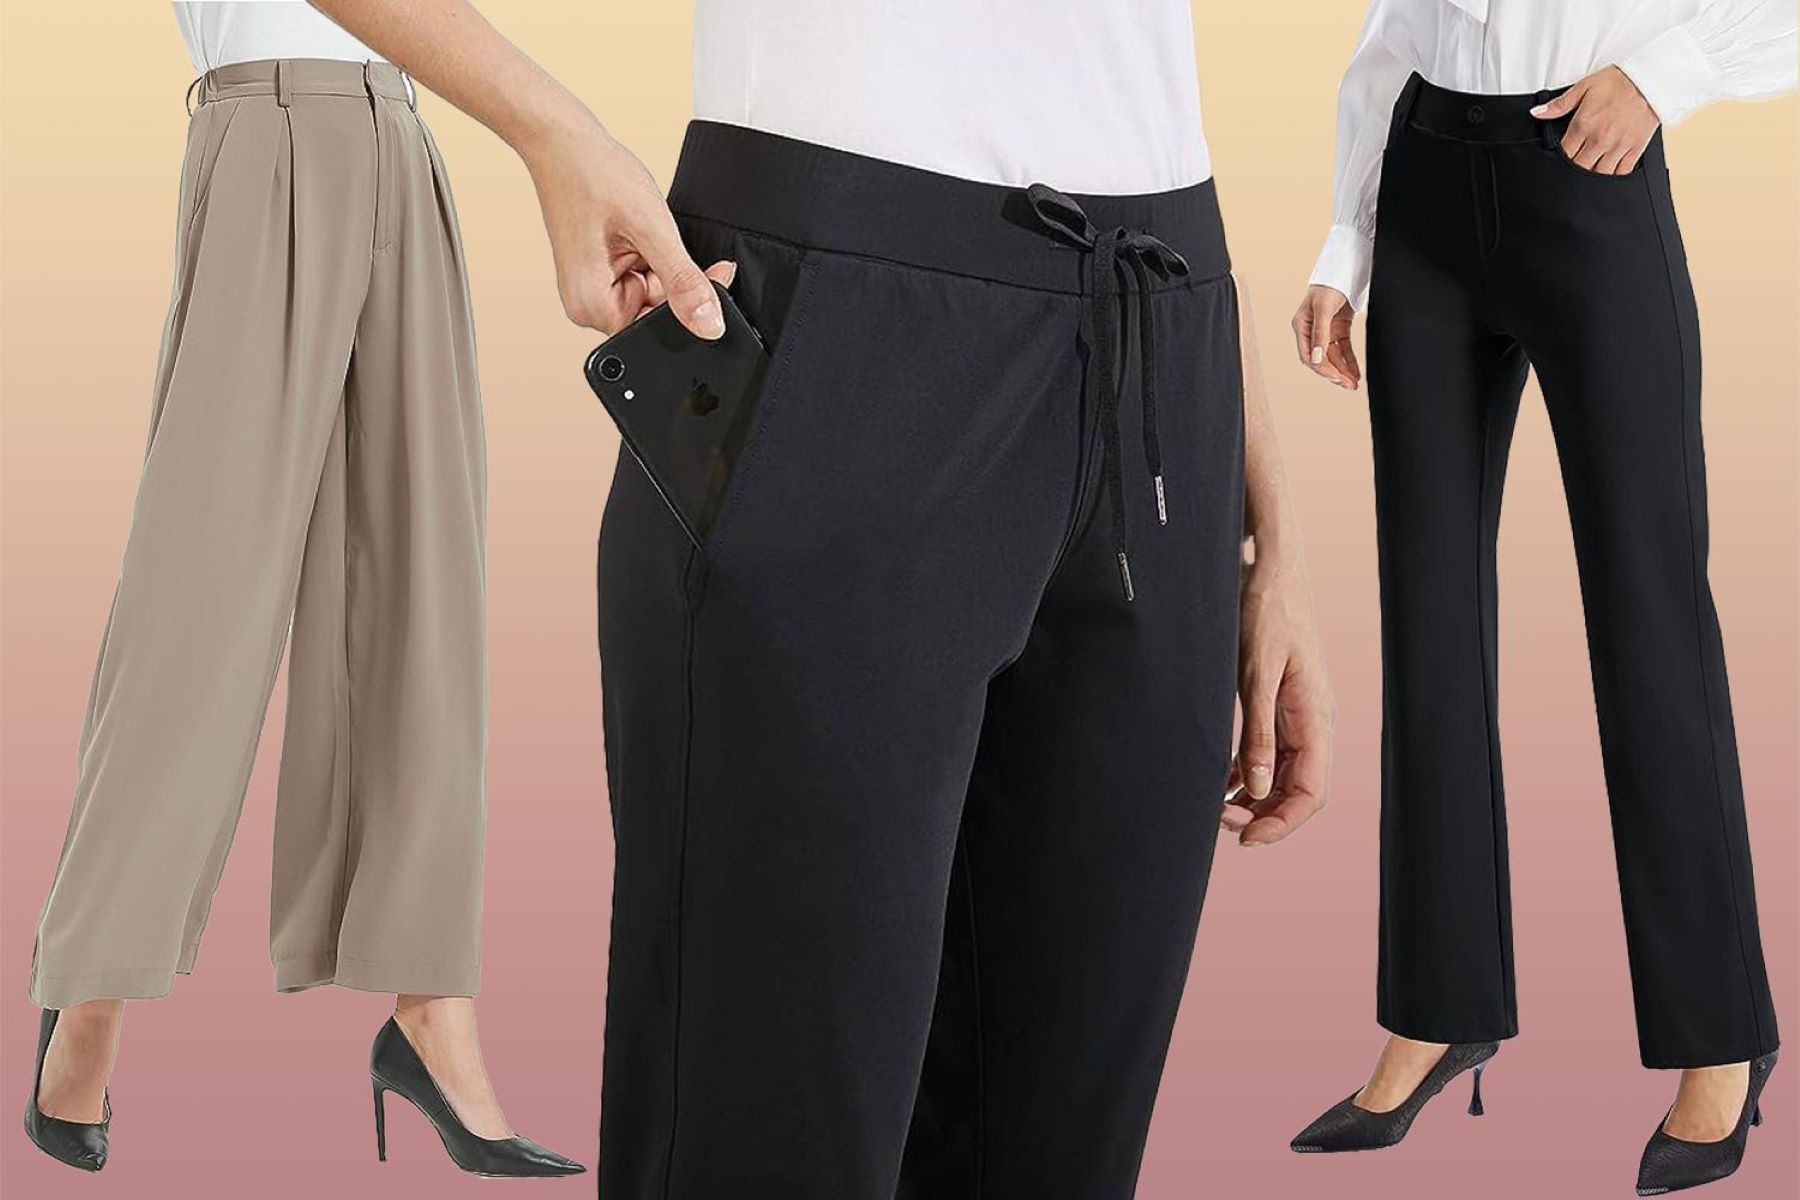 Discover The Perfect Fit: Women's Size Equivalent For Girl's Pants Size 14 Revealed!